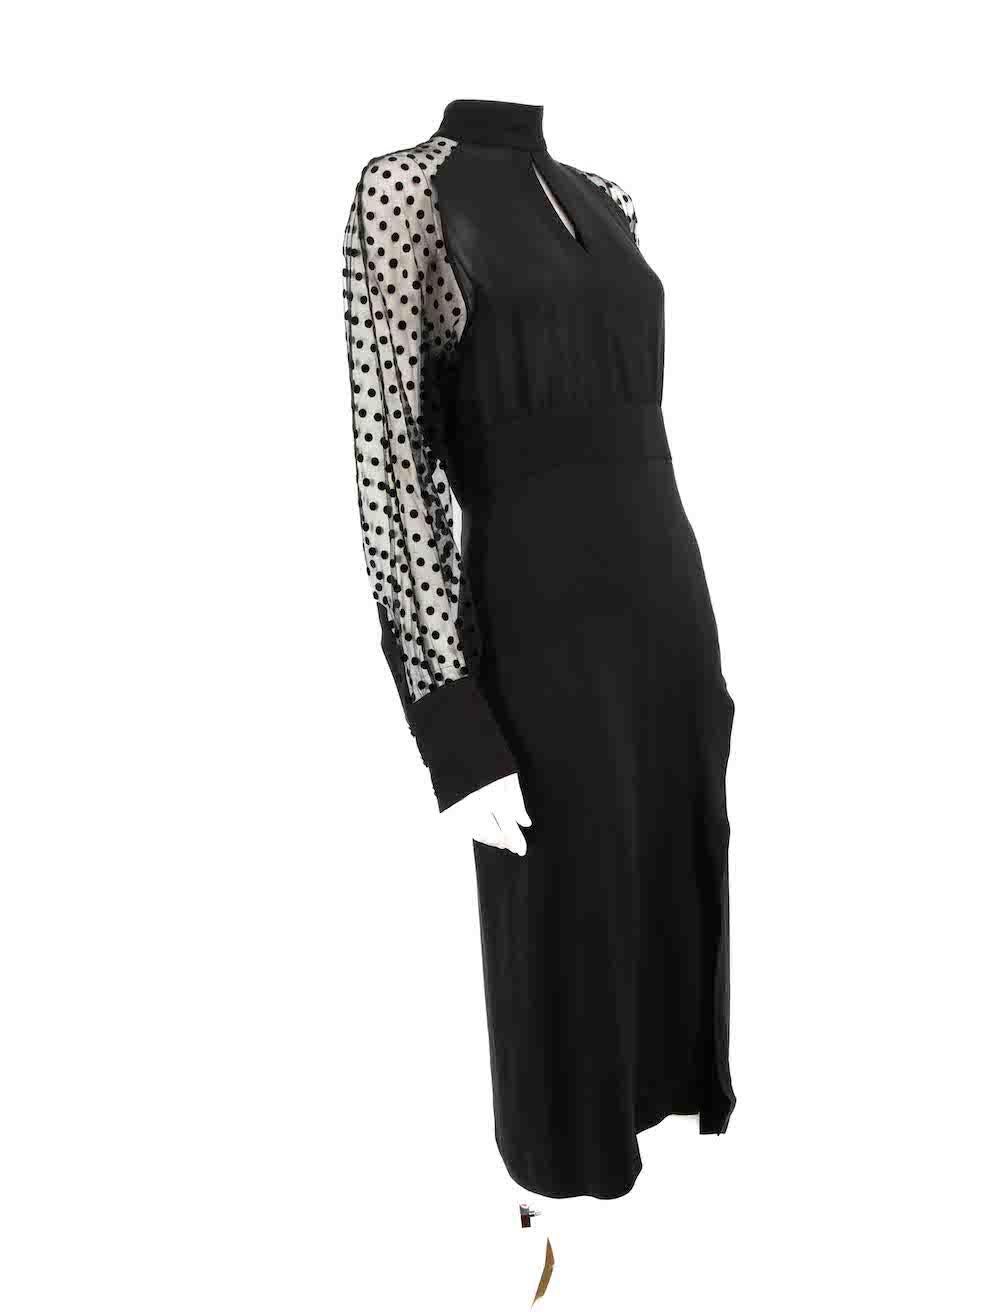 CONDITION is Never worn, with tags. No visible wear to dress is evident on this new Balmain designer resale item.
 
 Details
 Black
 Silk
 Dress
 Sheer polkadot sleeves
 Midi
 Mock neck
 Front keyhole cut out
 Snap button cuffs
 Back zip fastening
